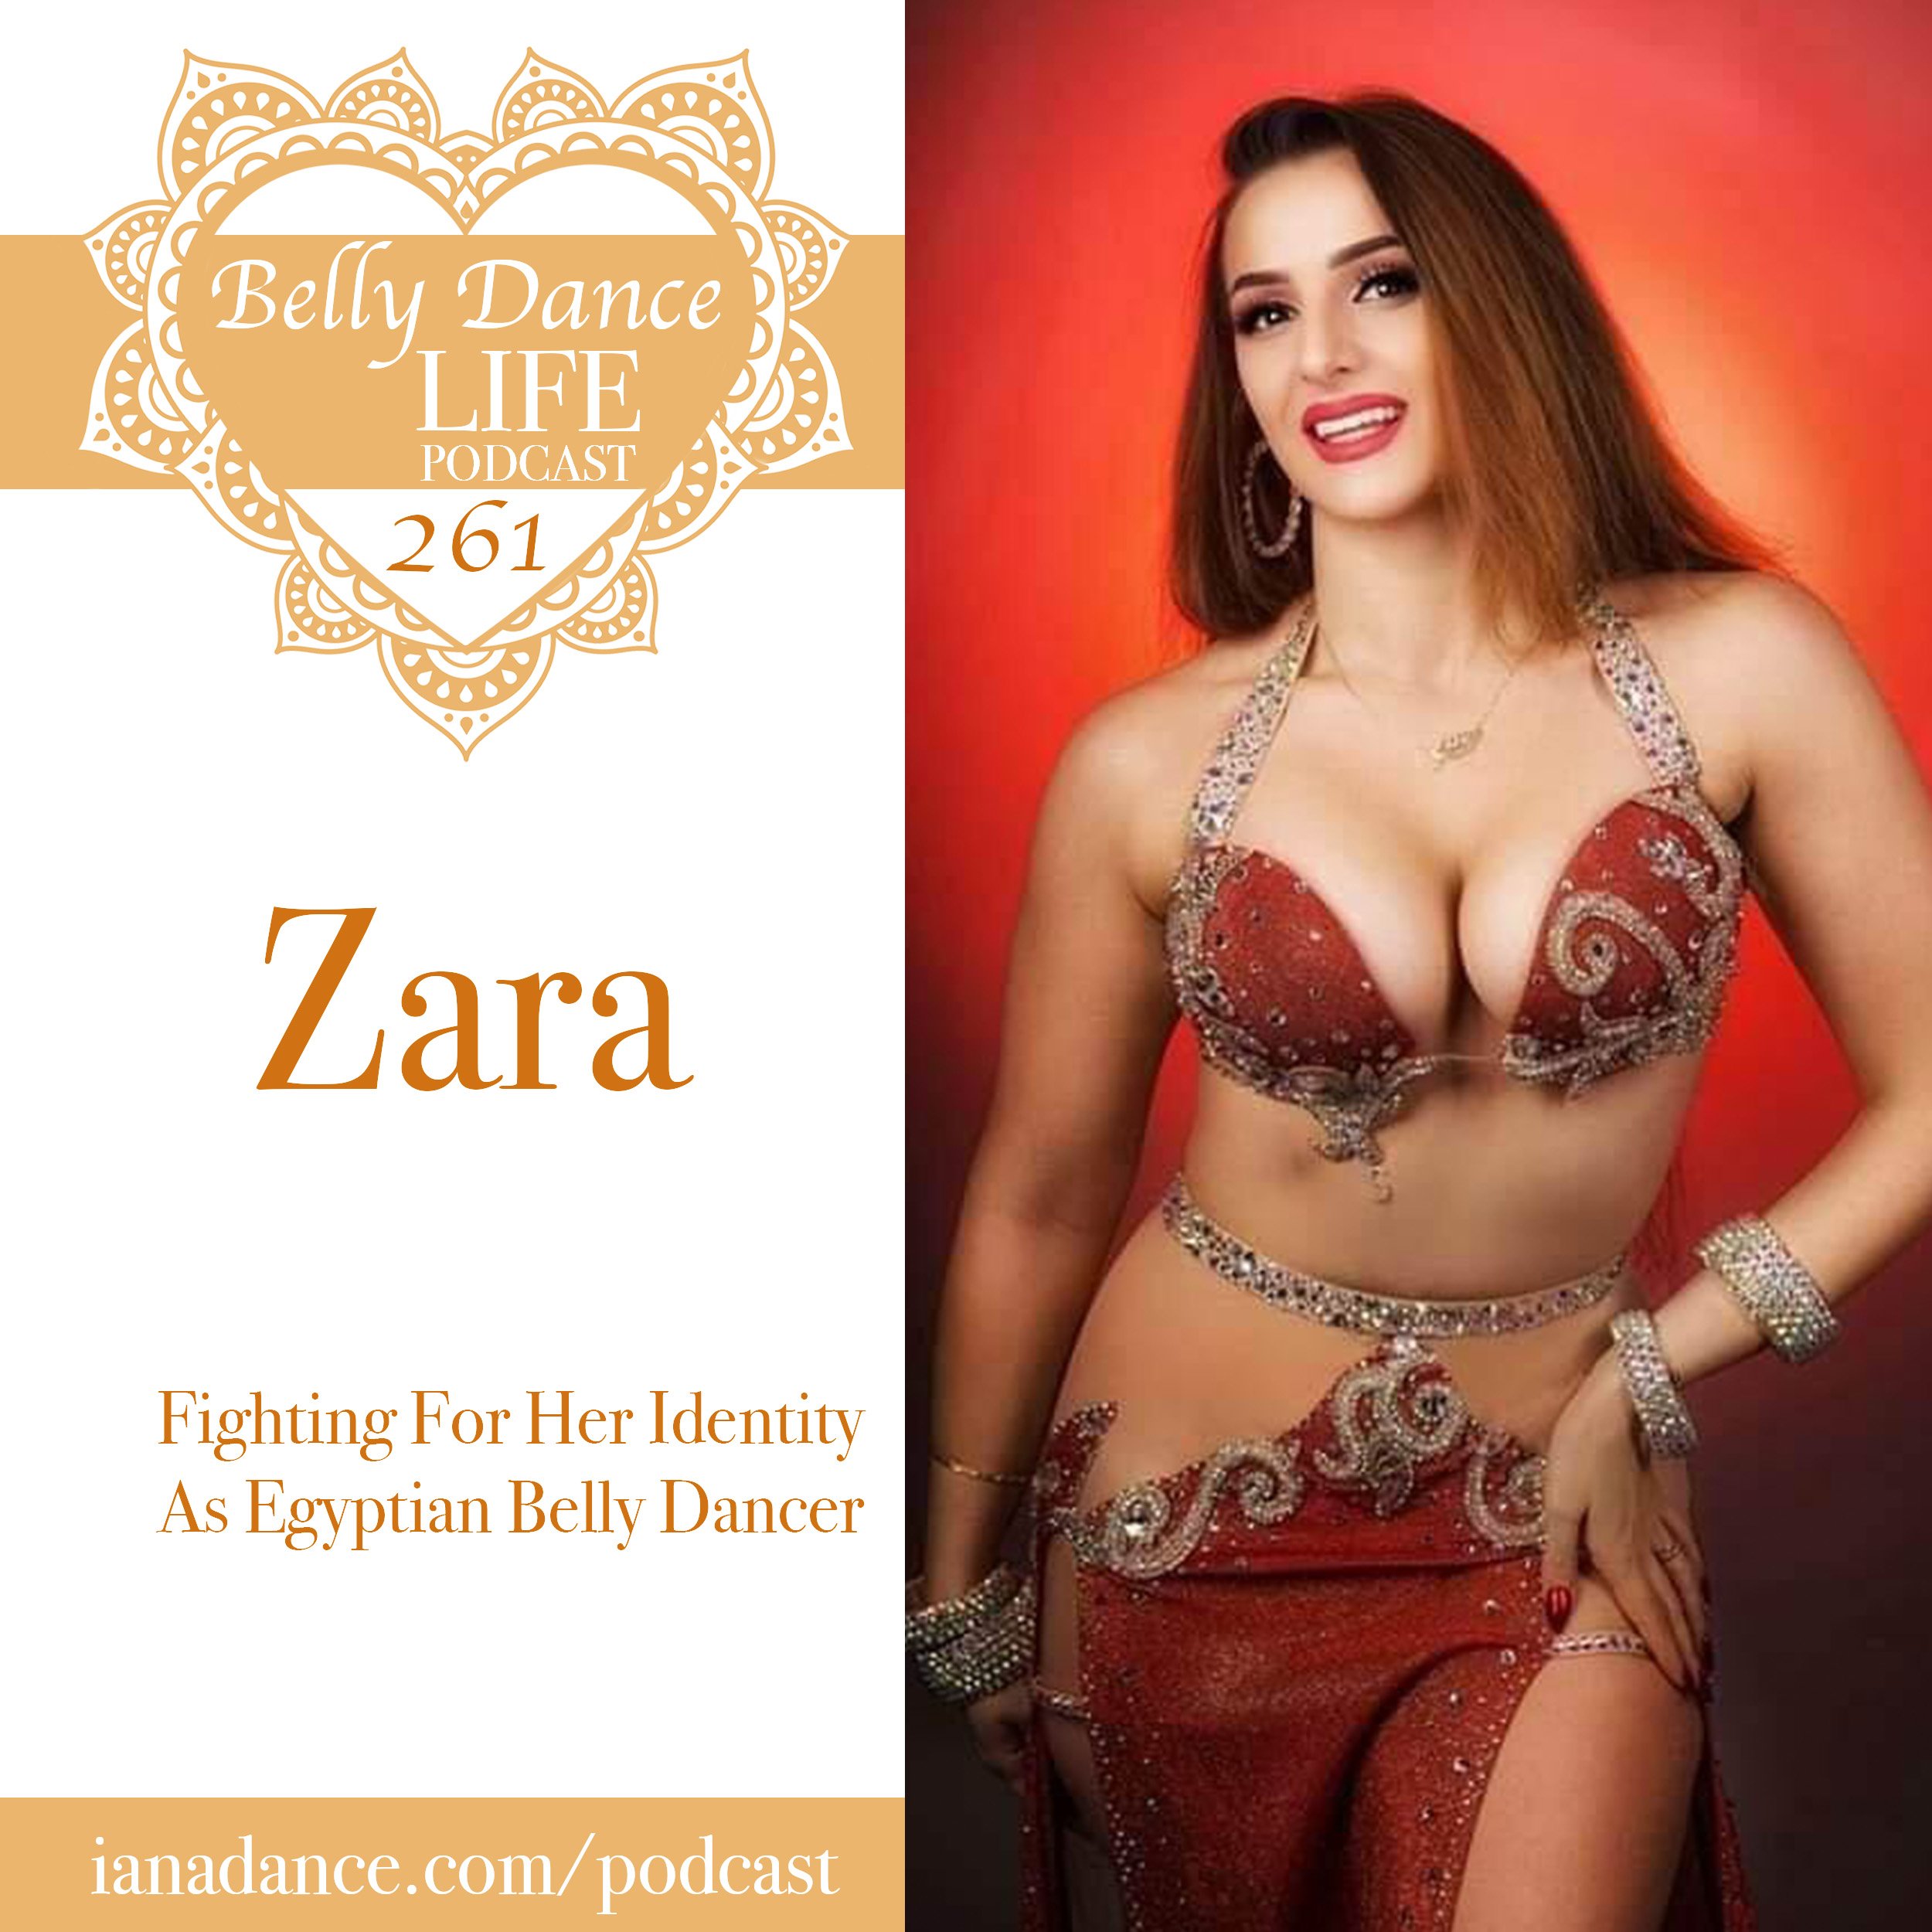 Iana Dance — Belly Dance Life Podcast image pic